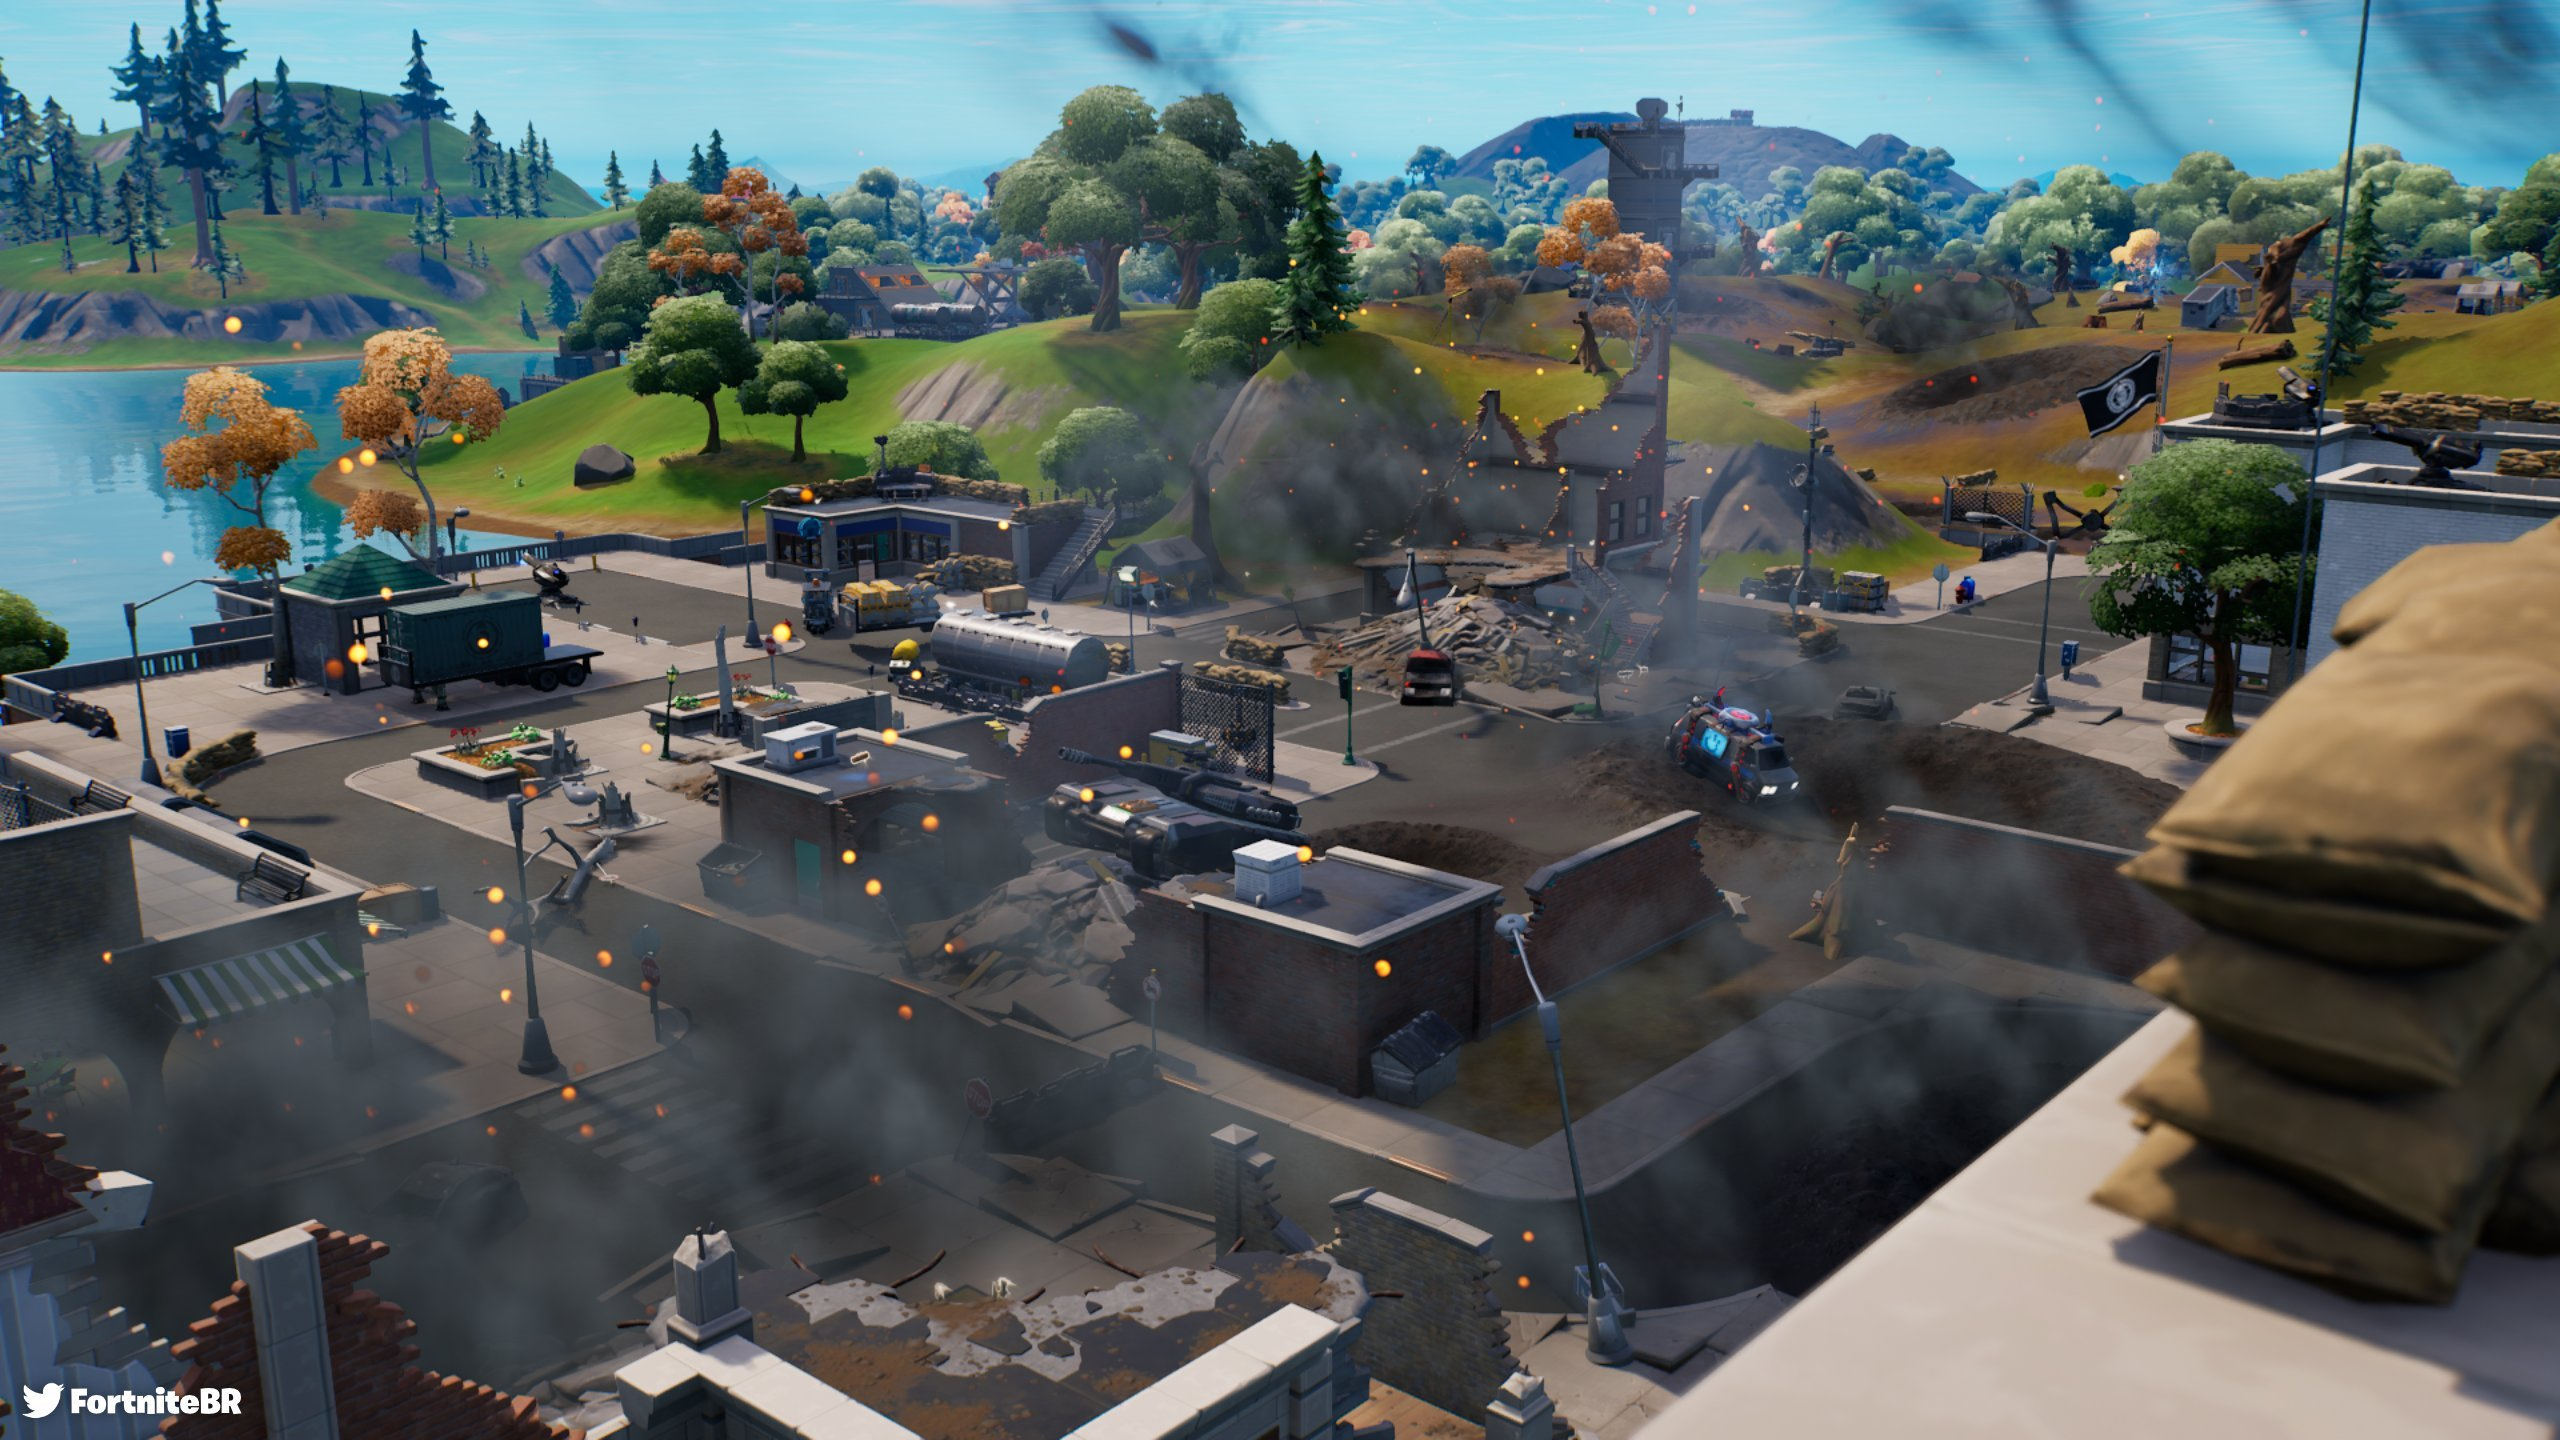 The Block 2.0: Players to rebuild Tilted Towers